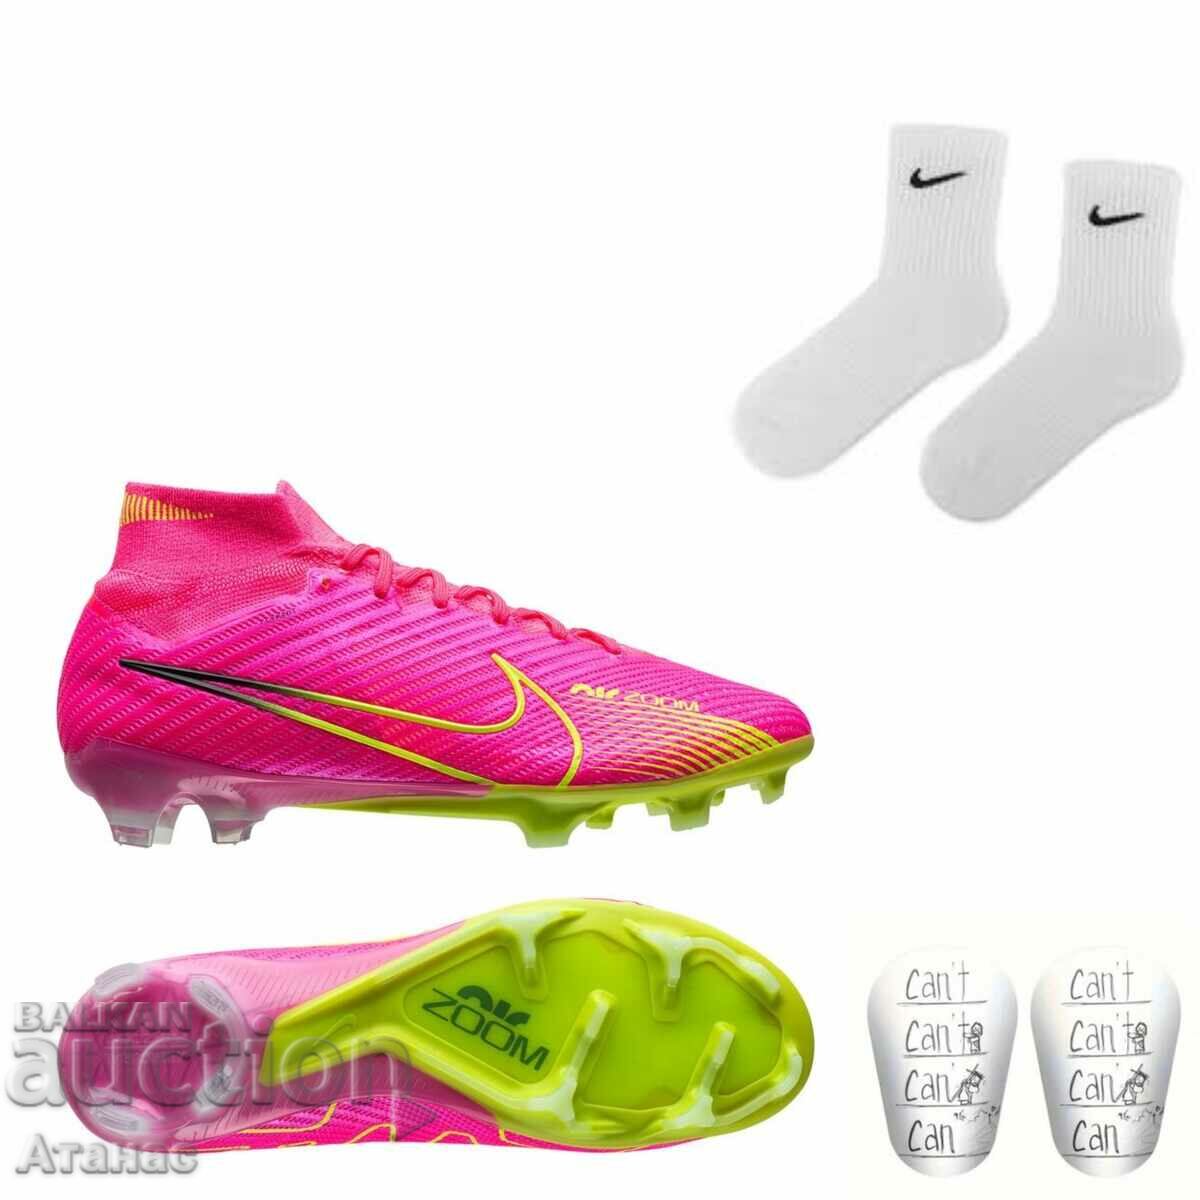 Mercurial superfly9 lumino buttons